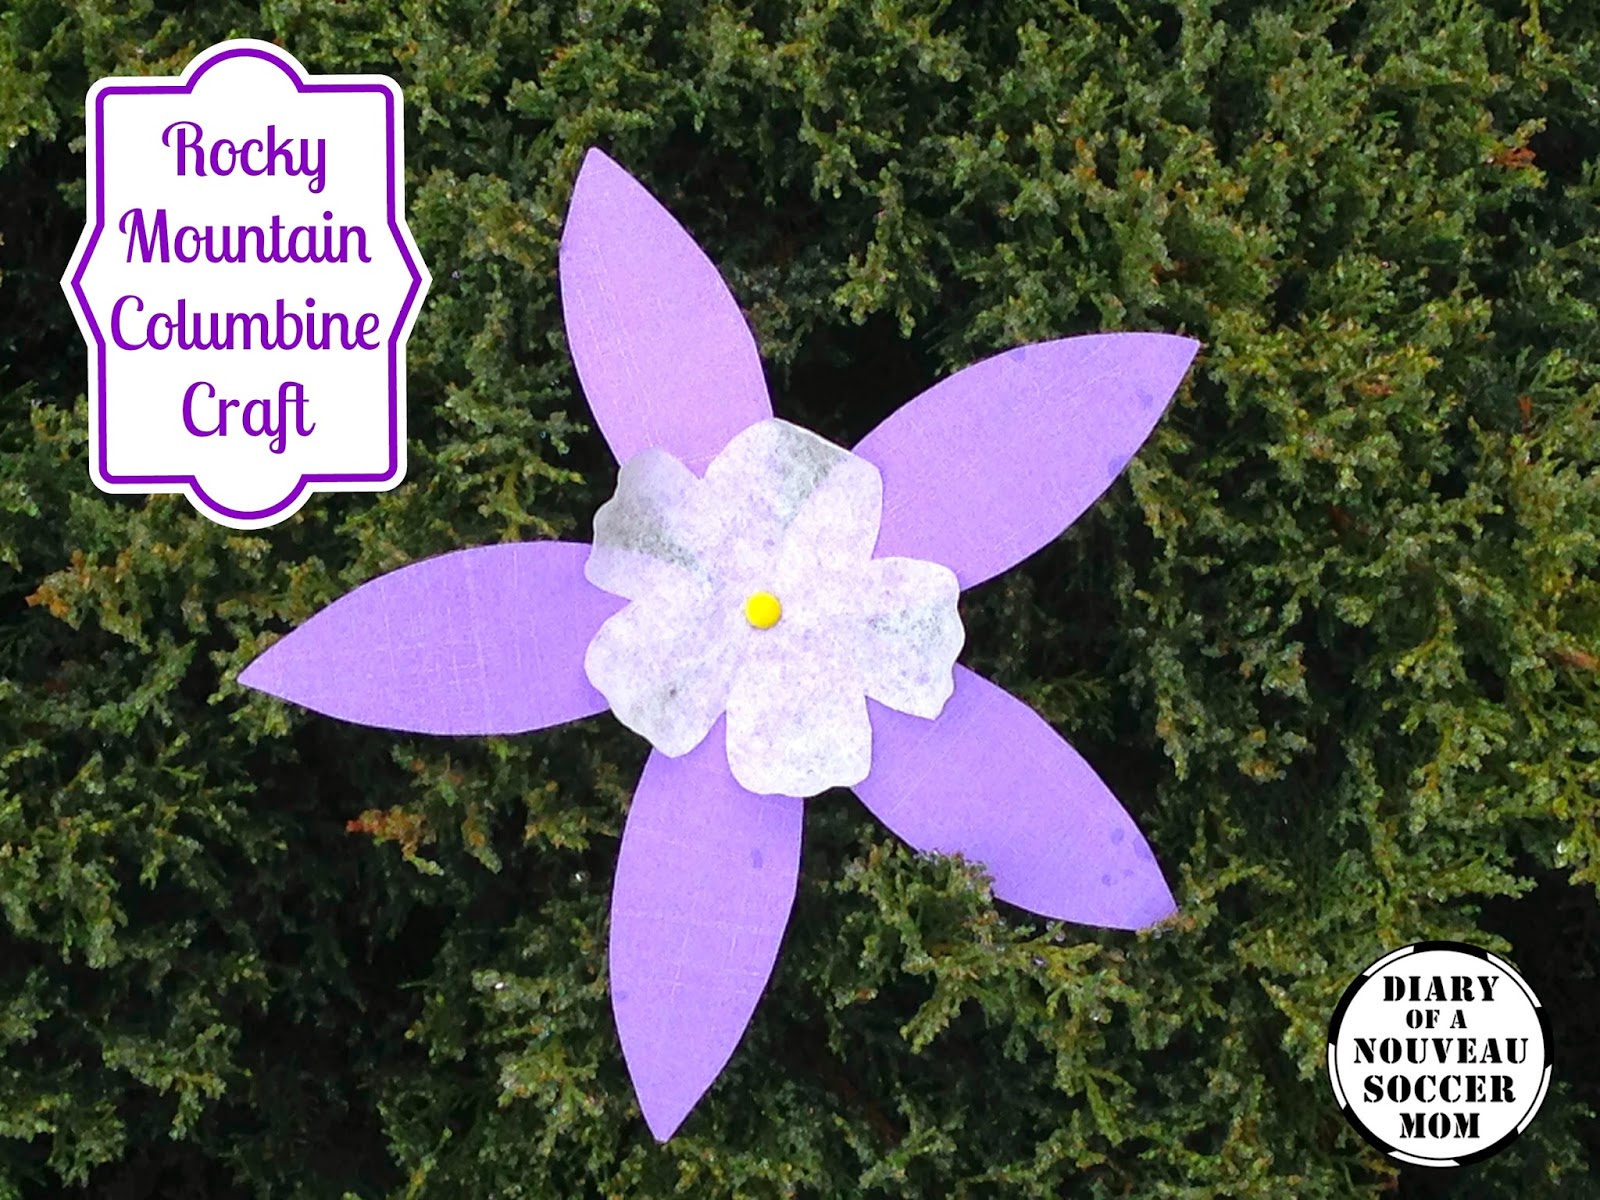 The Diary of a Nouveau Soccer Mom: Flower Craft for Kids: Rocky ...